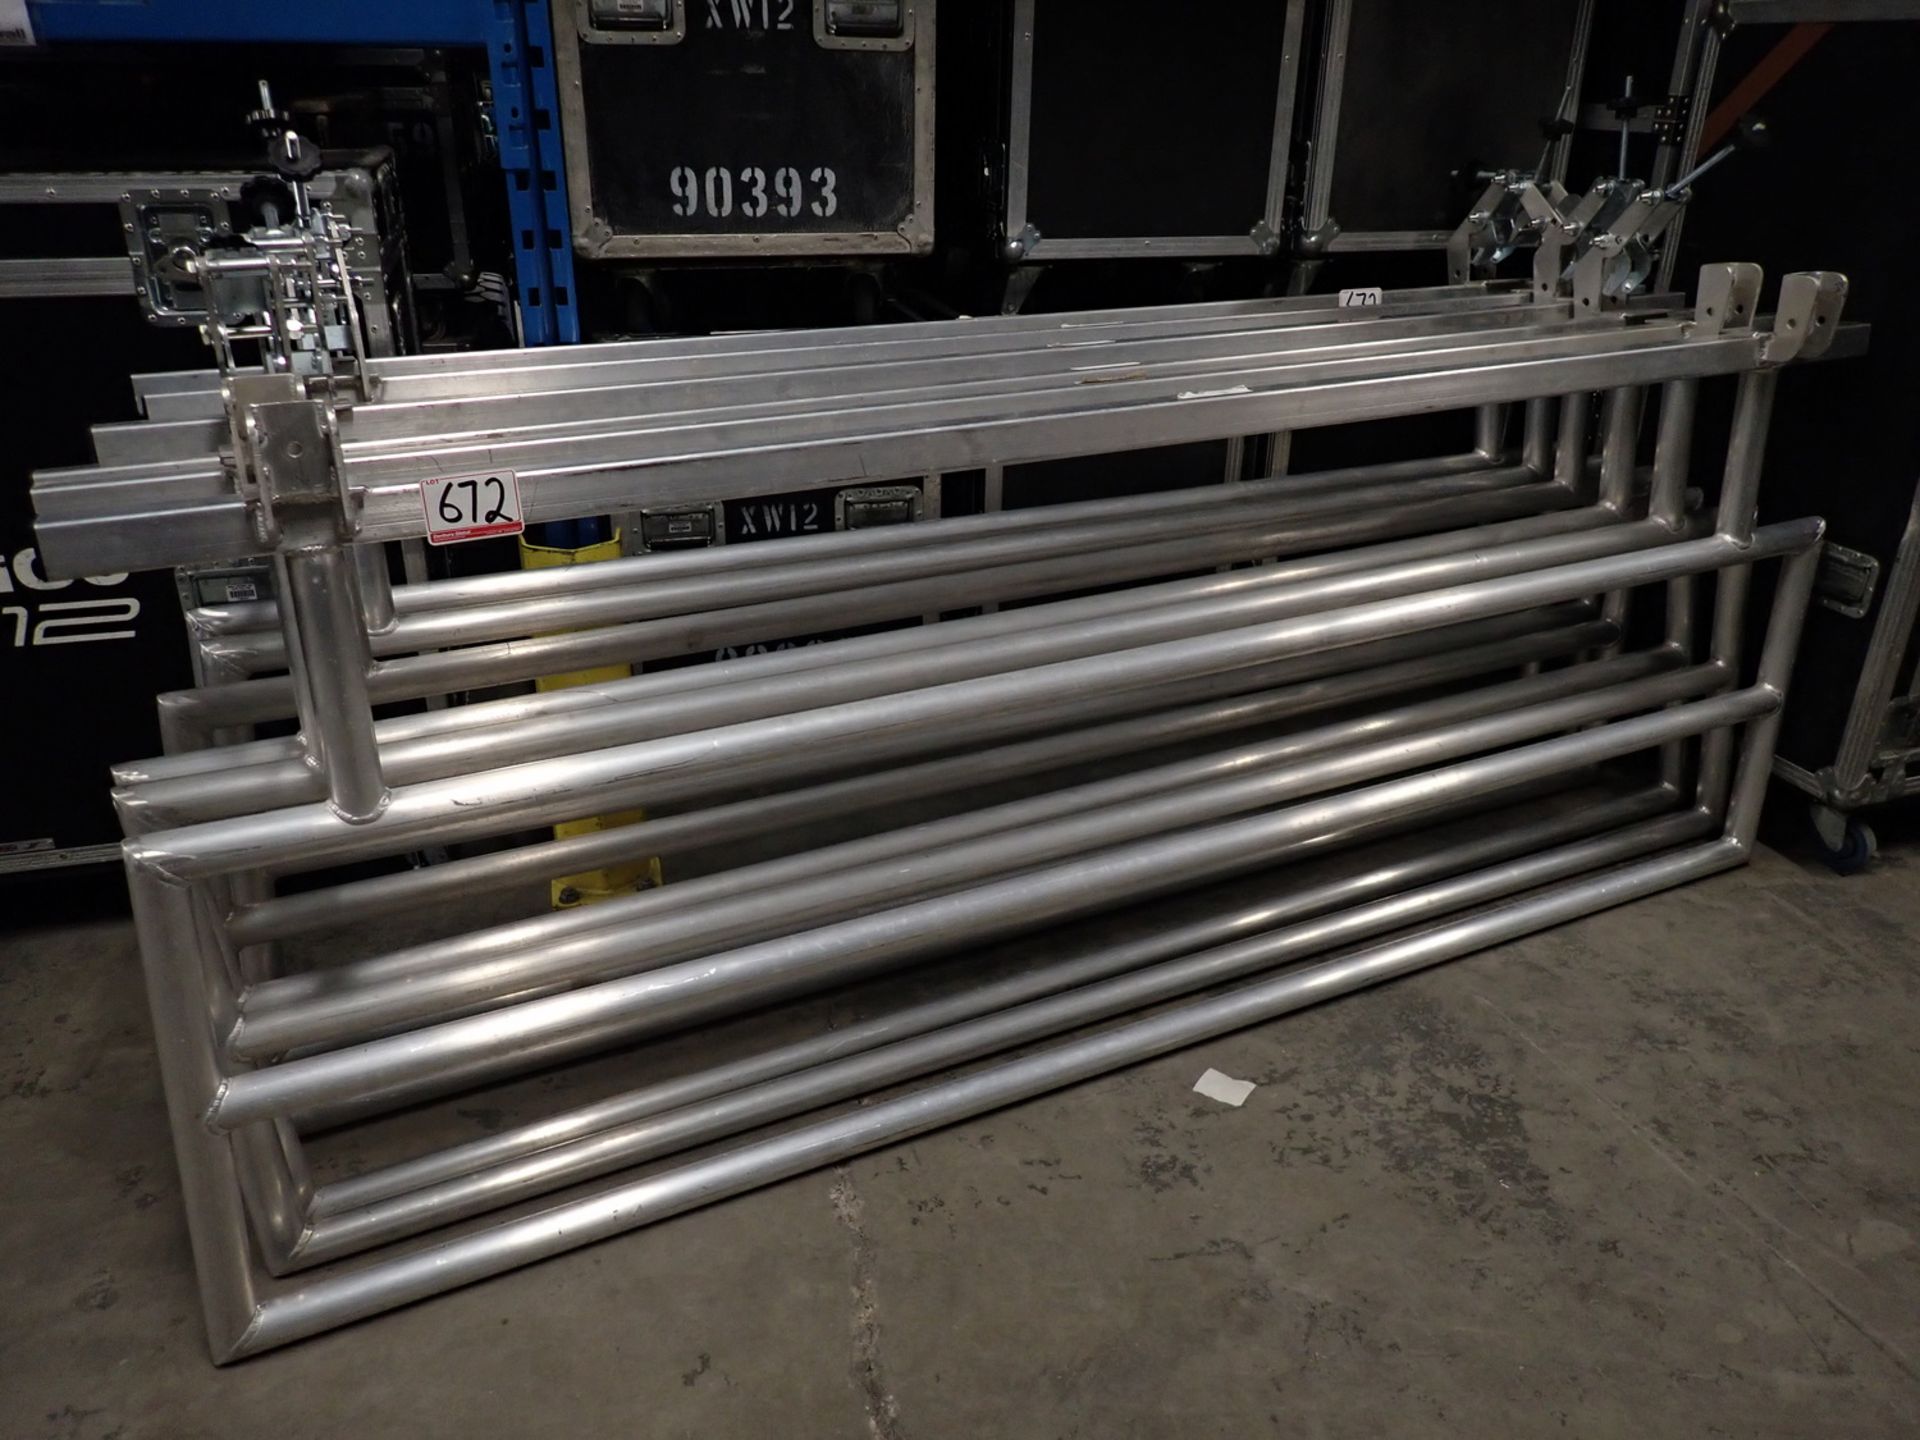 UNITS - ALUMINUM 8' X 3' SAFETY RAILINGS (2) MISSING CLAMPS